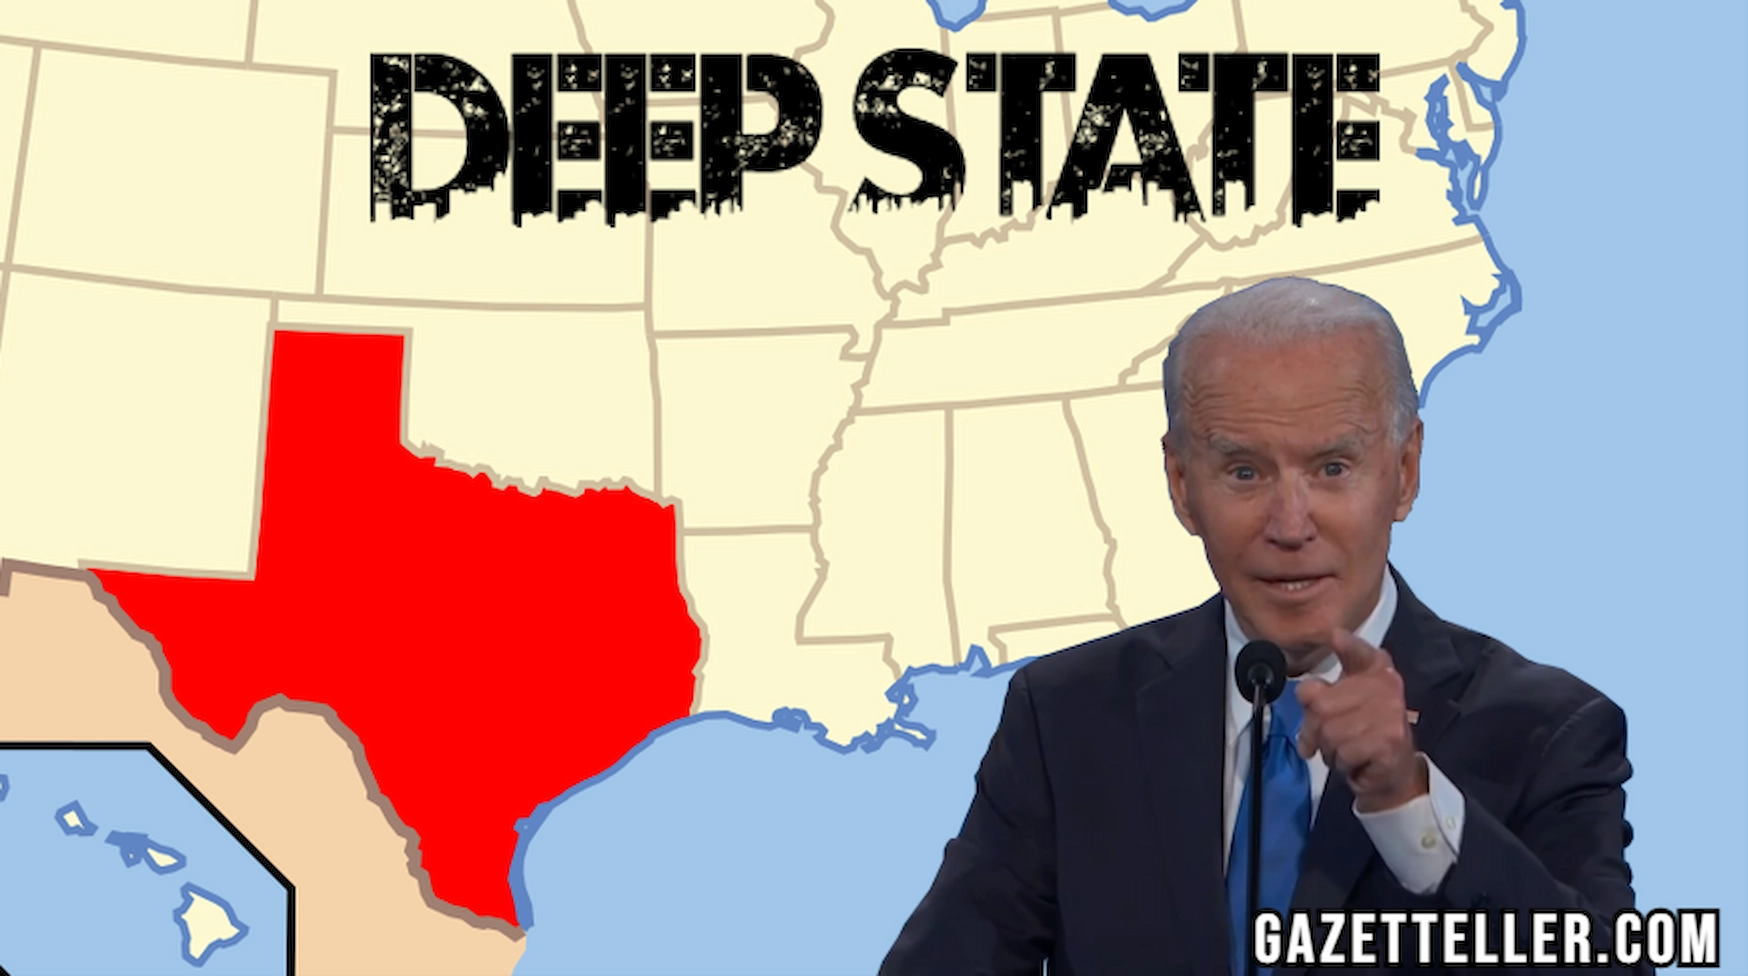 Texas Leads the Fight to Save America: A Fierce Battle Against Bioweapons and Deep State Control – 34,000 Military Oath Keepers and 700,000 Truckers Unite to Challenge the Obama and Biden Administrations!